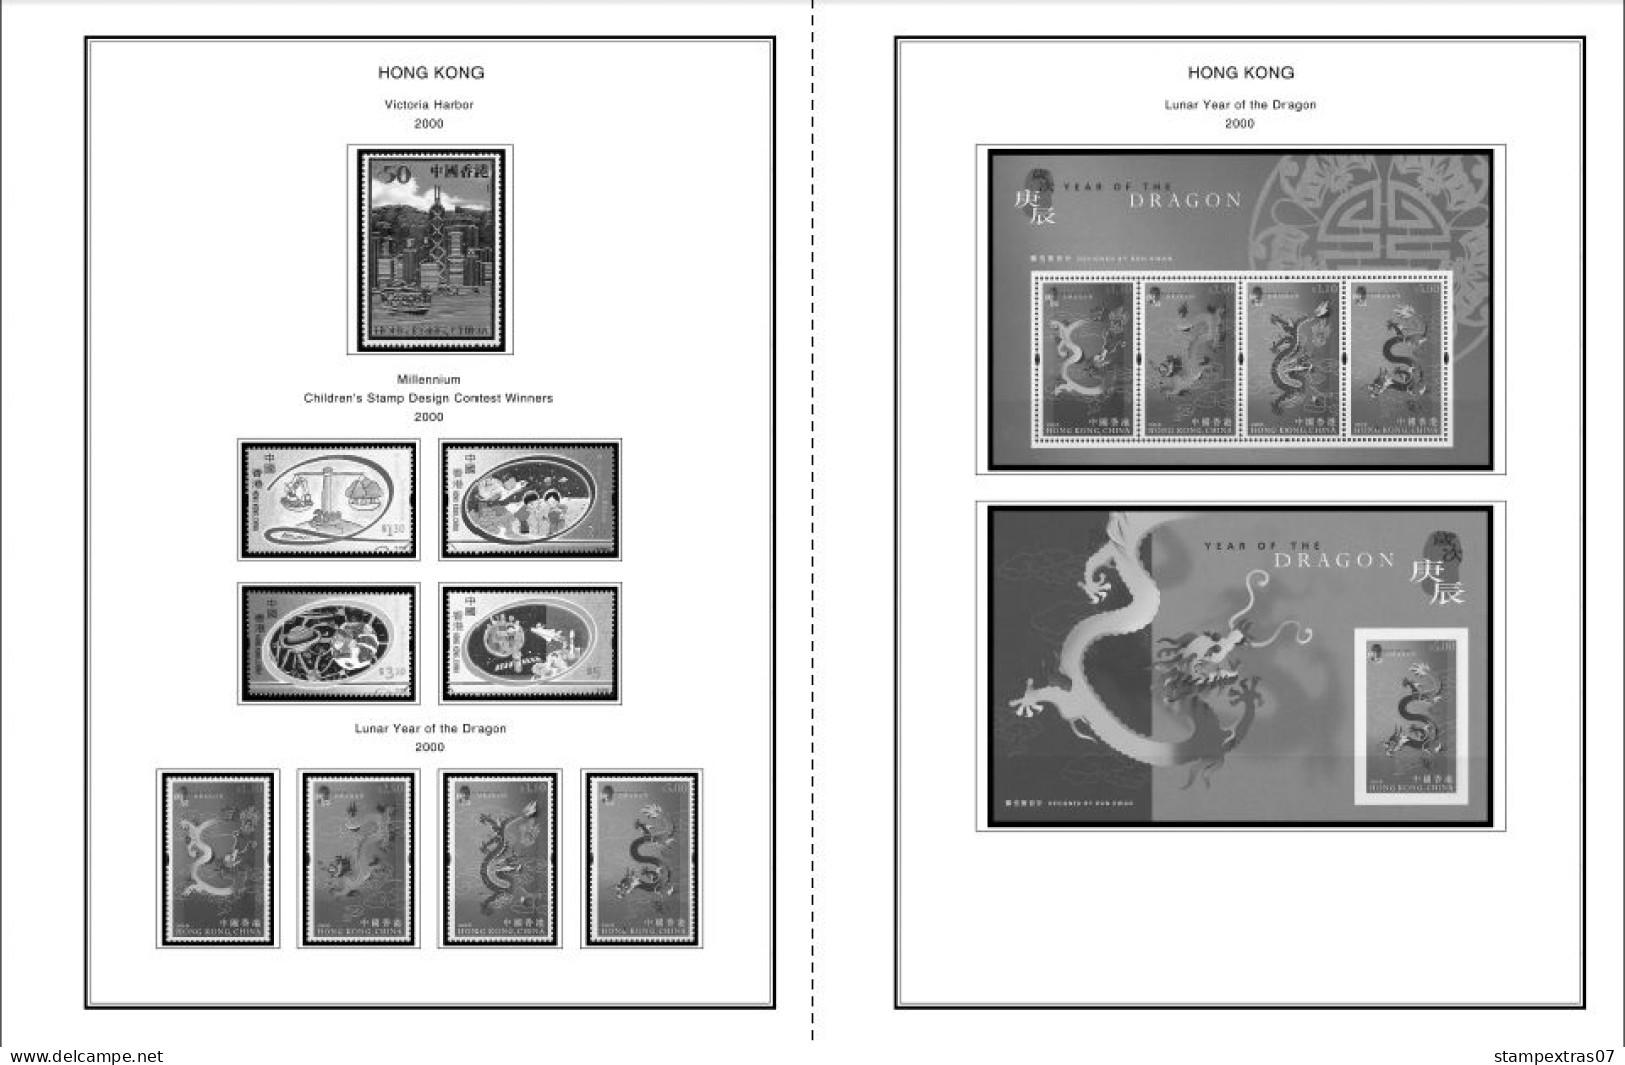 HONG KONG [SAR] 1998-2010 + 2011-2020 STAMP ALBUM PAGES (309 b&w illustrated pages)